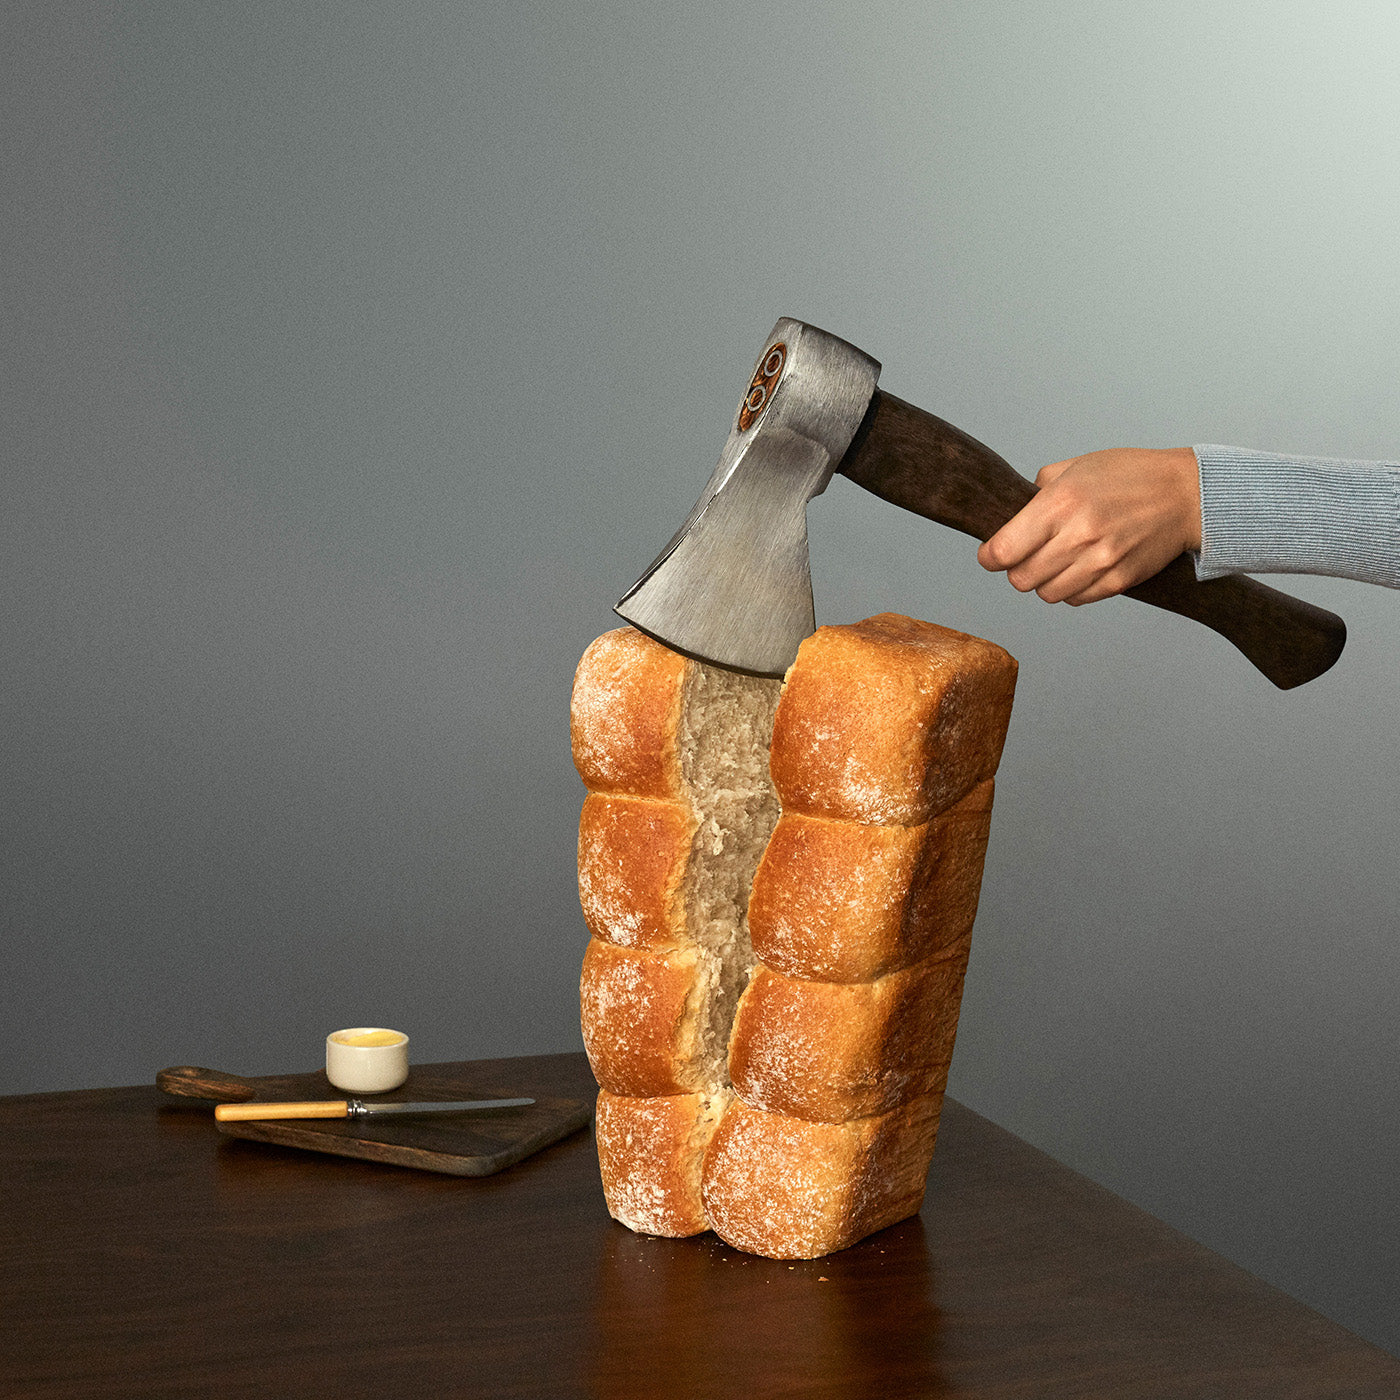 Chopping bread with an axe. Image by Fragmento Universo 